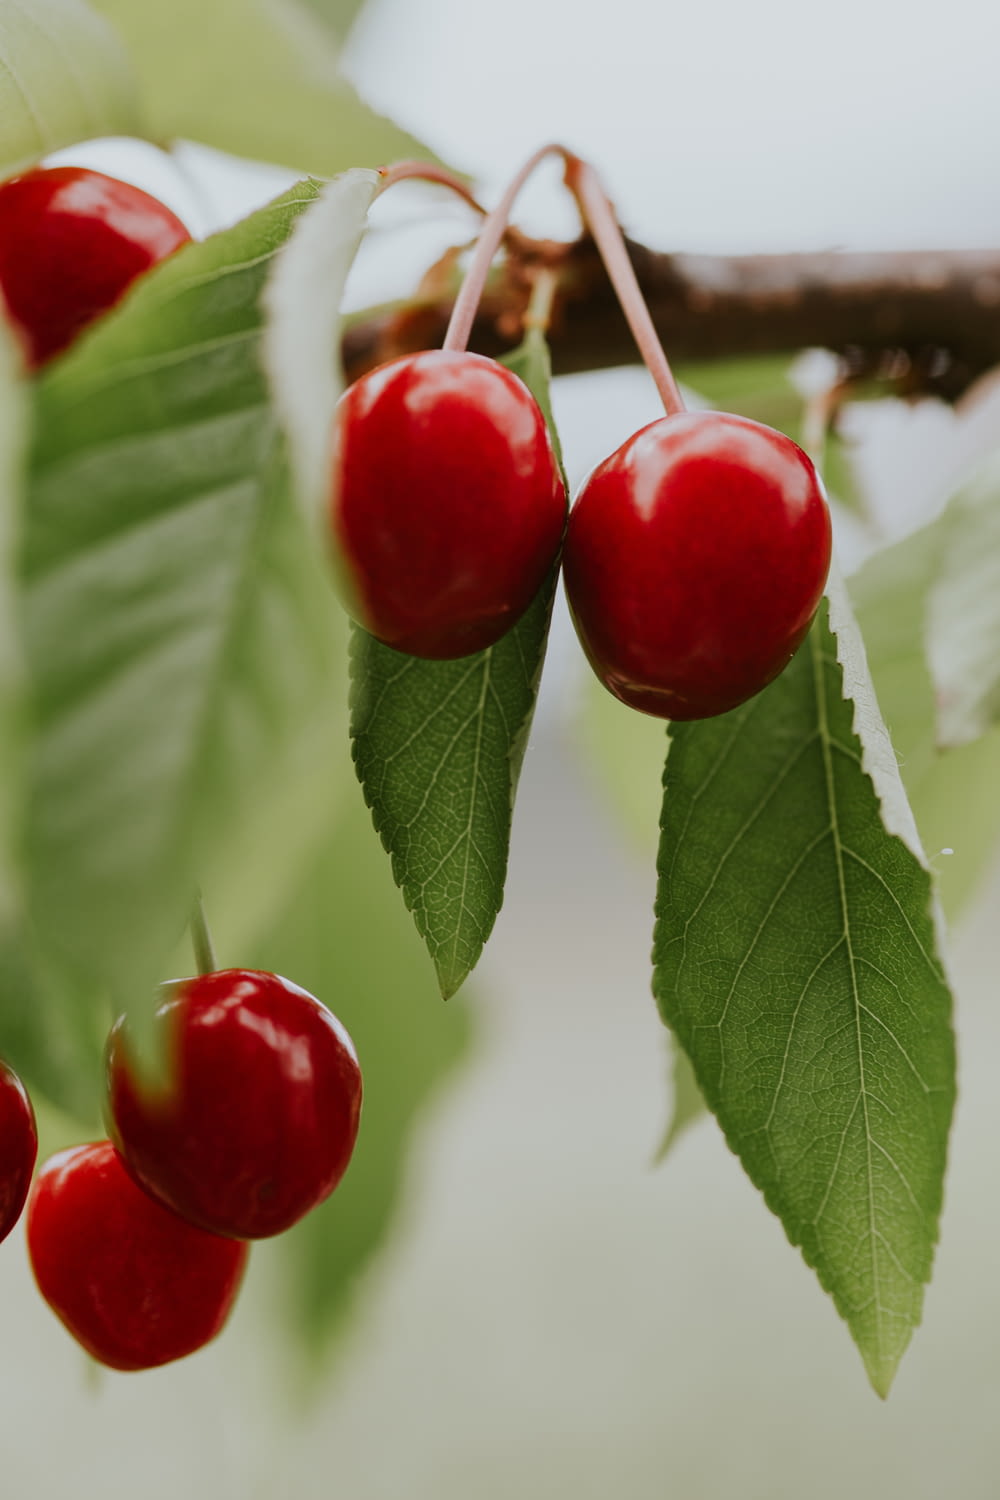 cherries hanging from a tree branch with green leaves